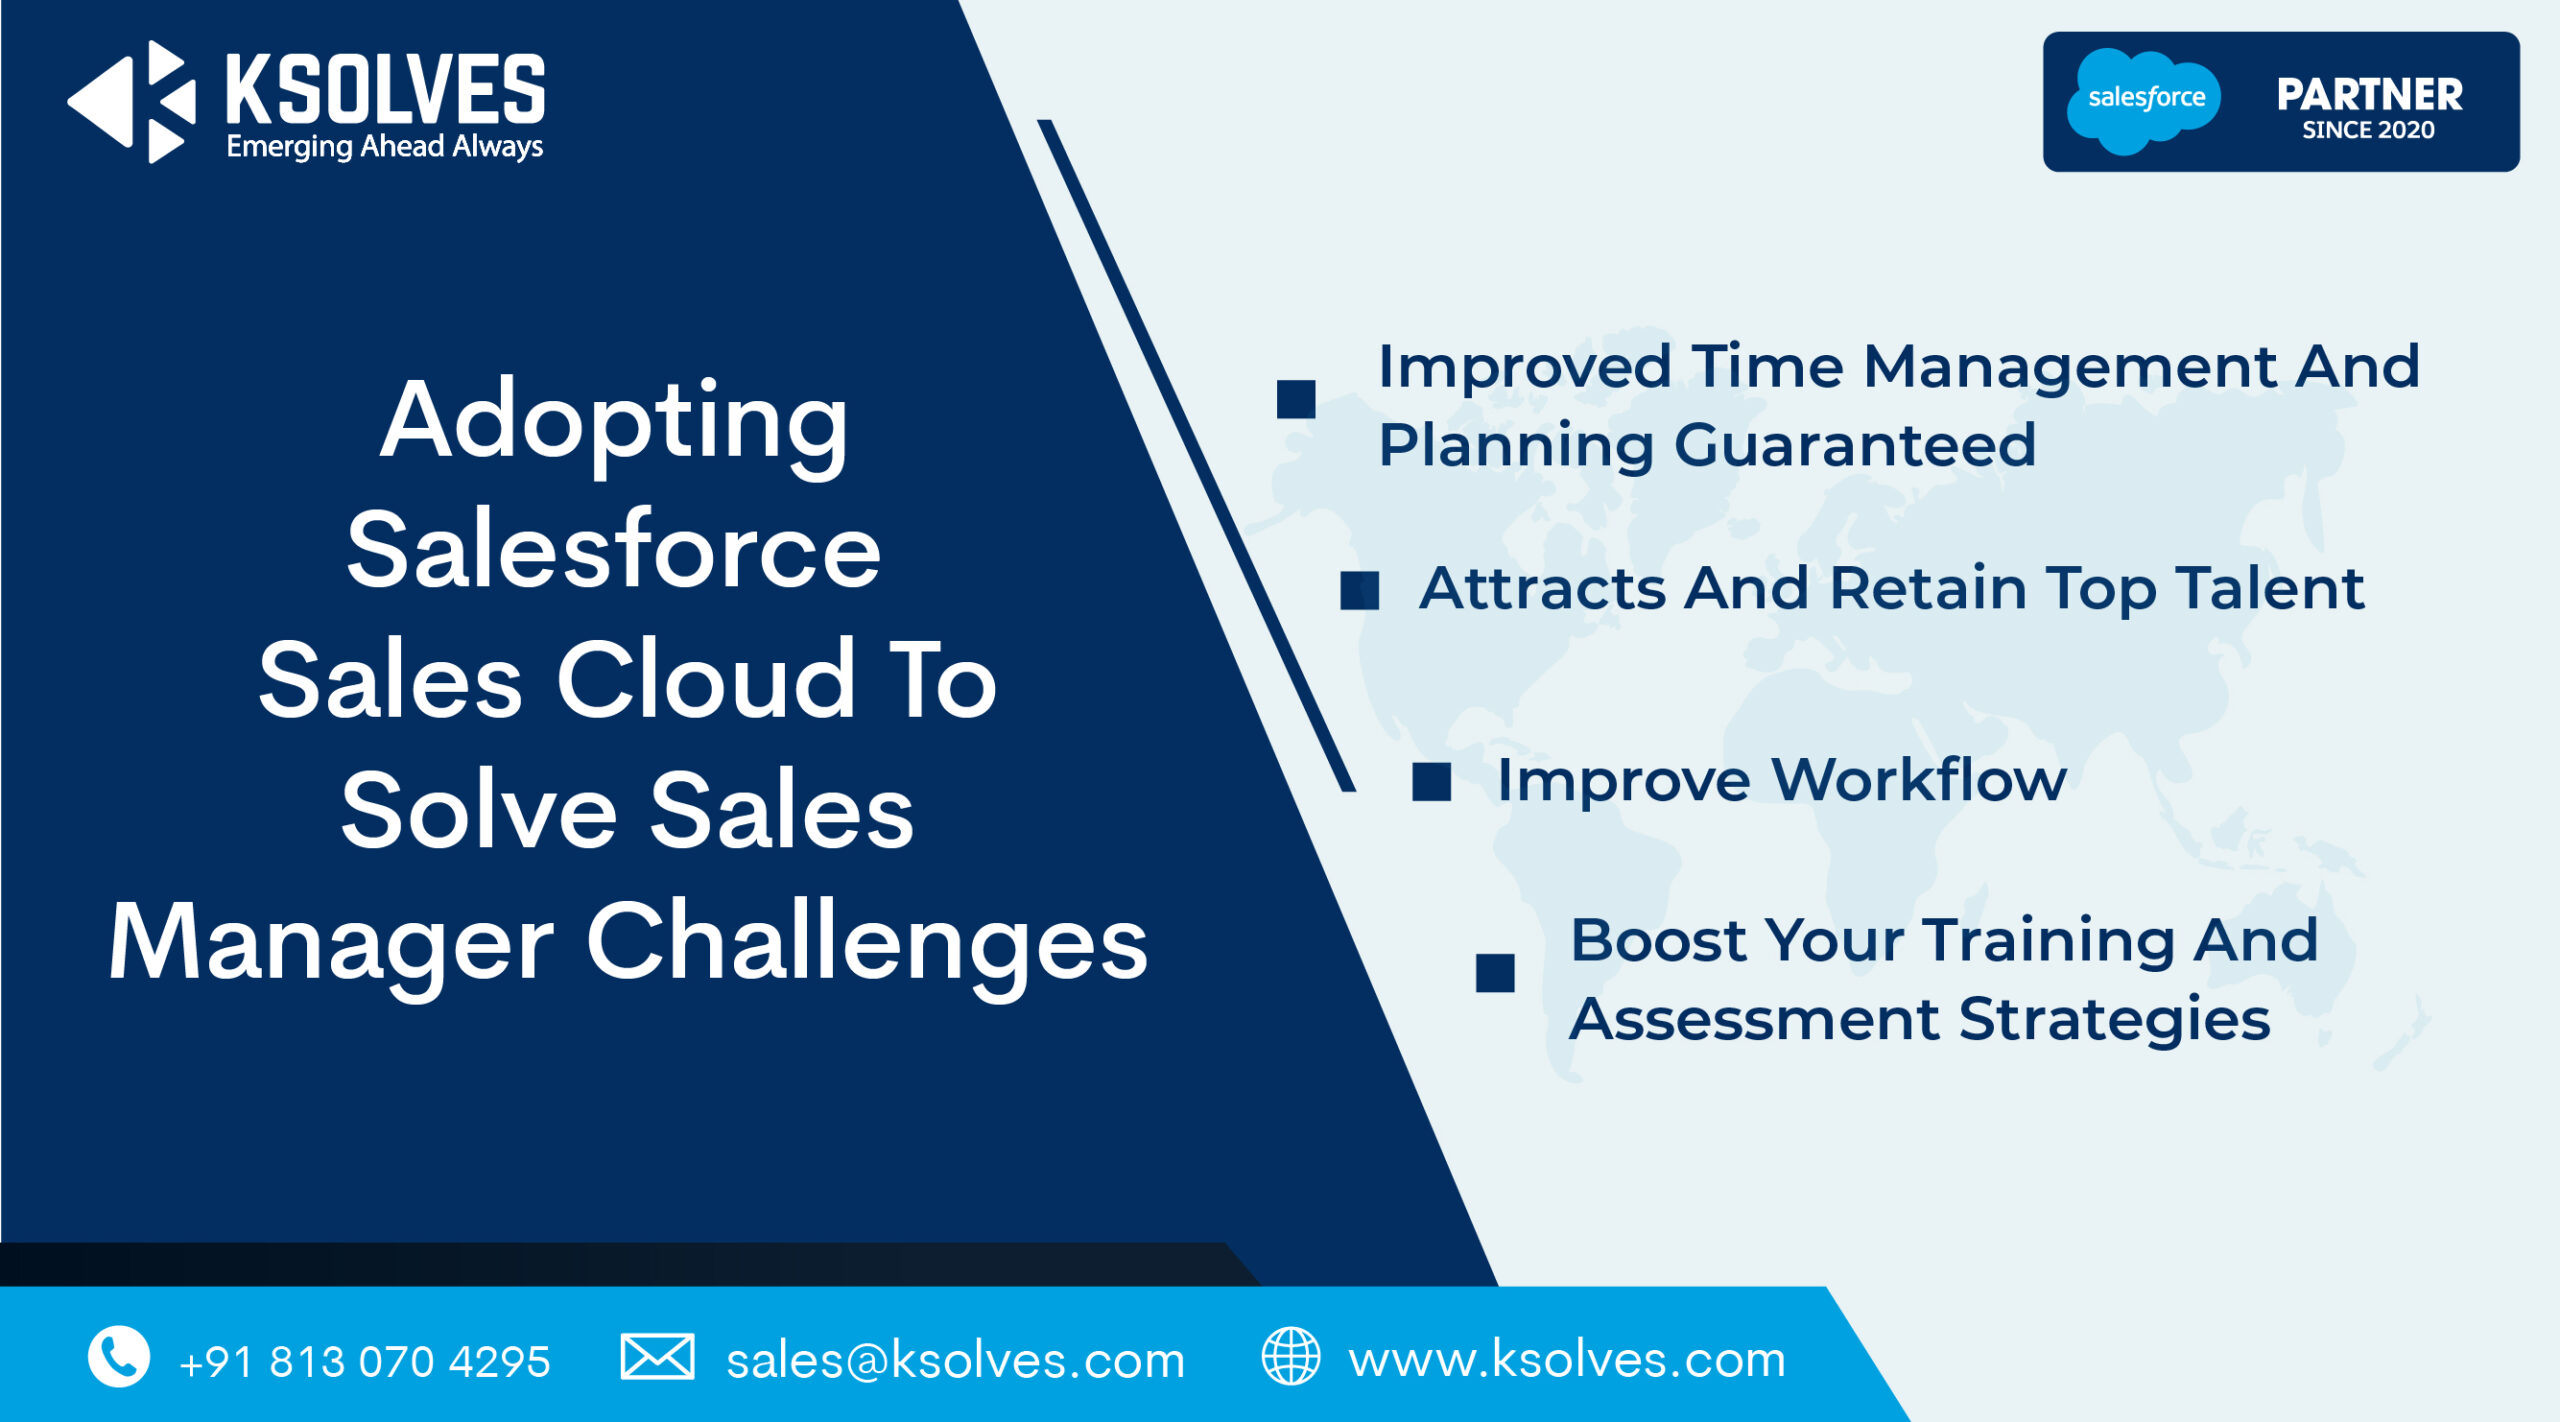 Adopting Salesforce Sales Cloud To Solve Sales Manager Challenges